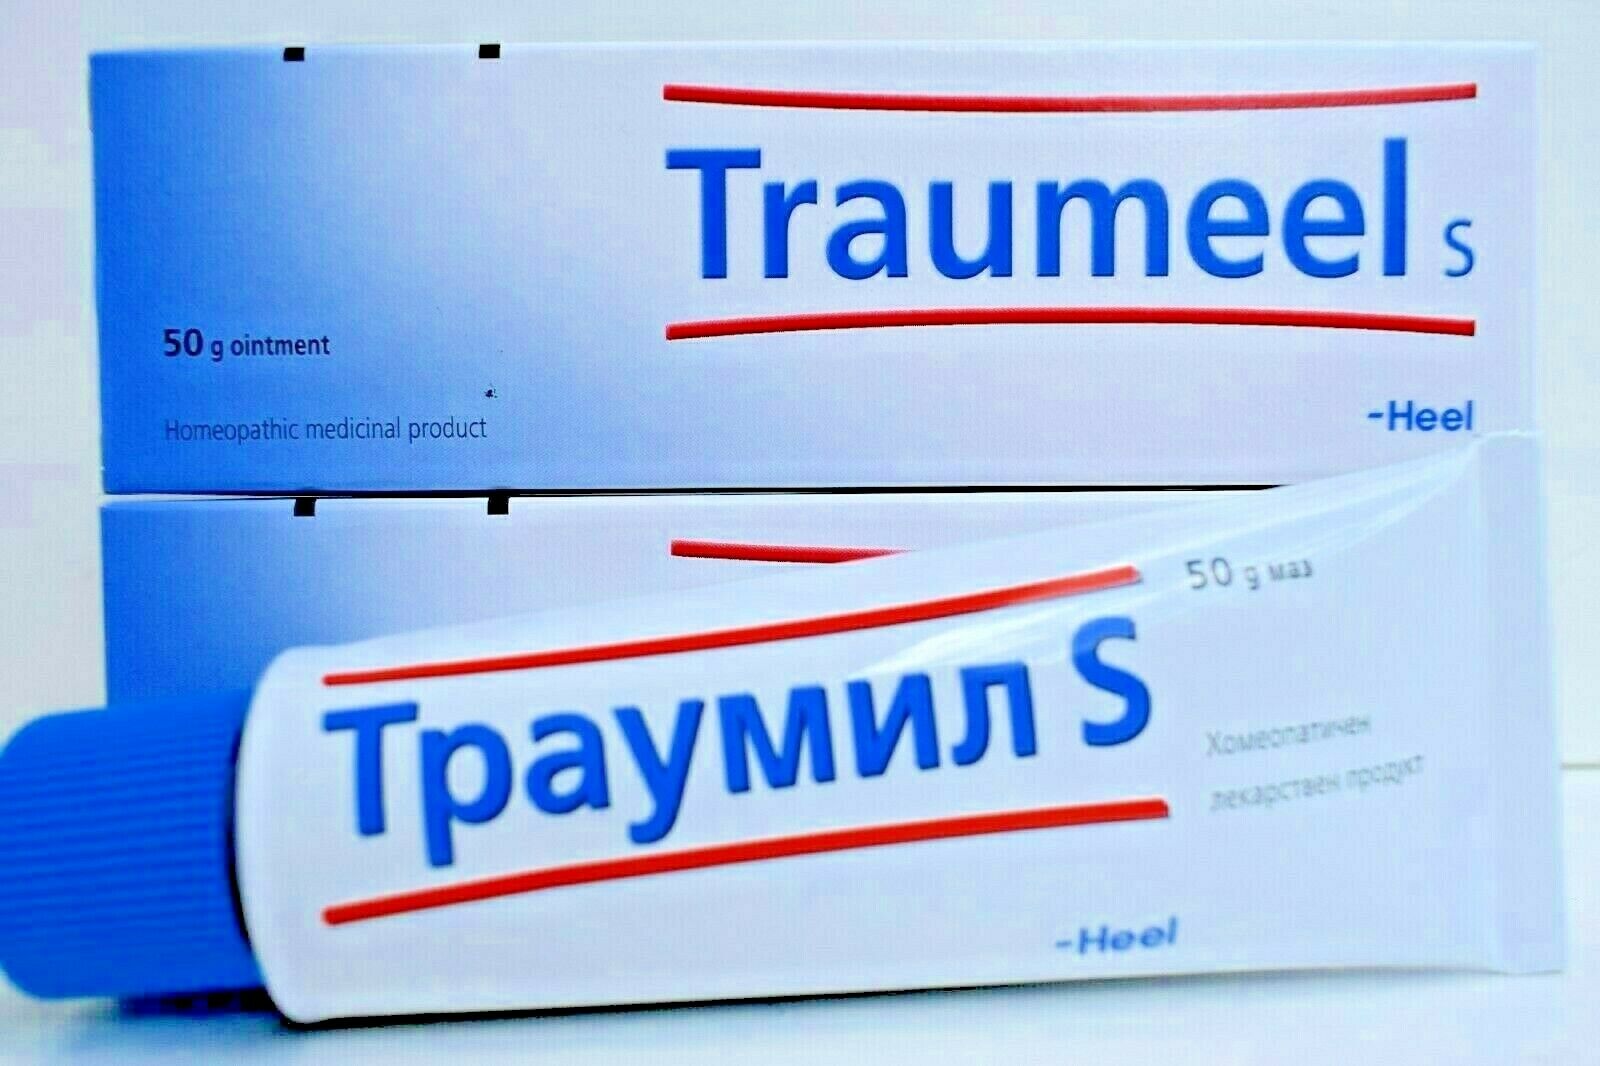 Traumeel S Anti-inflammatory Homeopathic Cream Pain Relief 50mg Ointment 04.2023